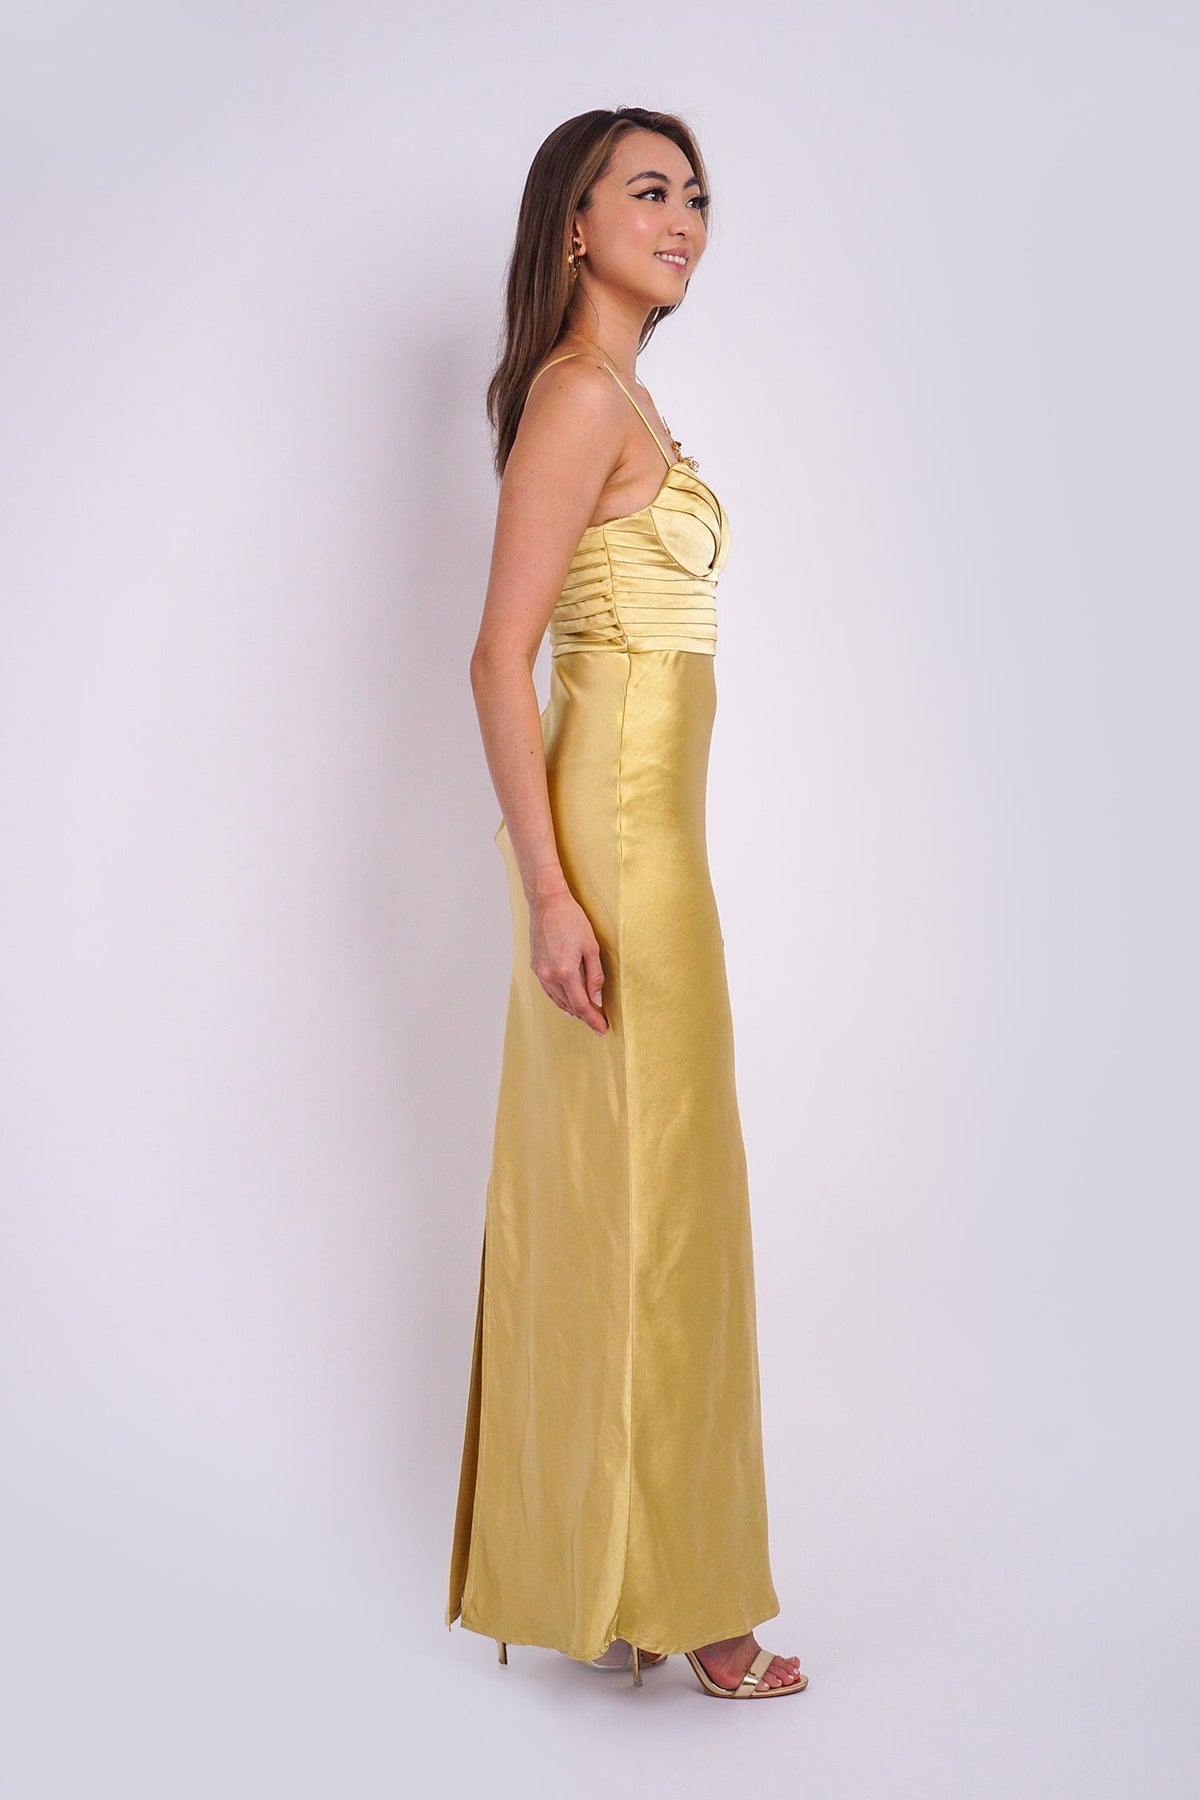 DCD DRESSES Satin Gold Pleated Sweetheart Gown